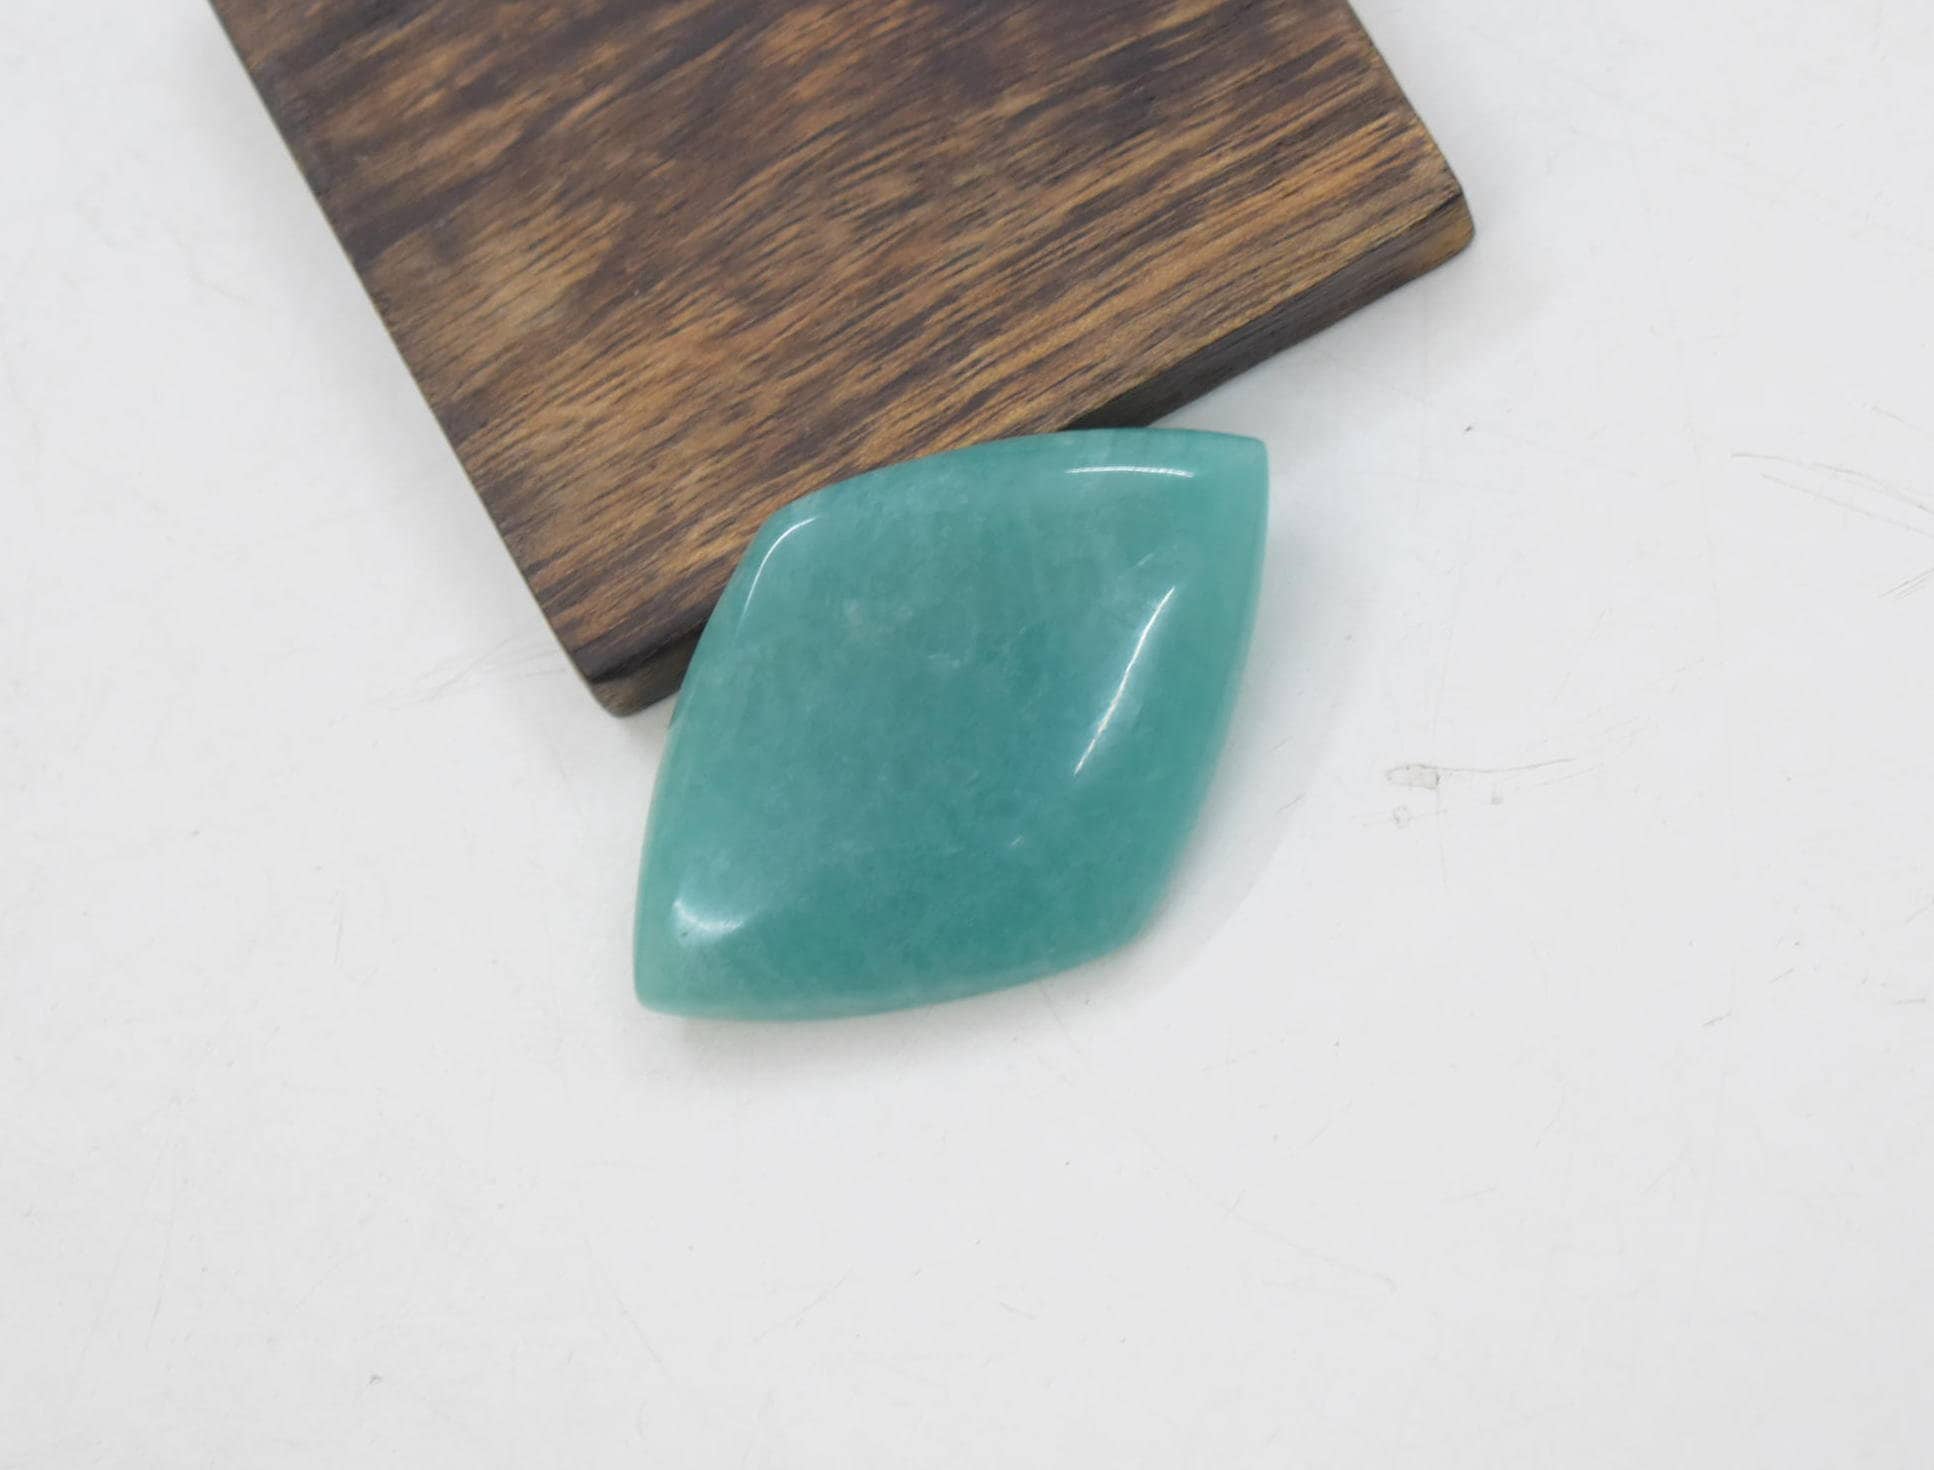 100% Natural African Amazonite Cabochon,Green Amazonite,Handmade Plain Cabochon,Handmade Faceted Cabochon,Natural Color Amazonite | Save 33% - Rajasthan Living 14